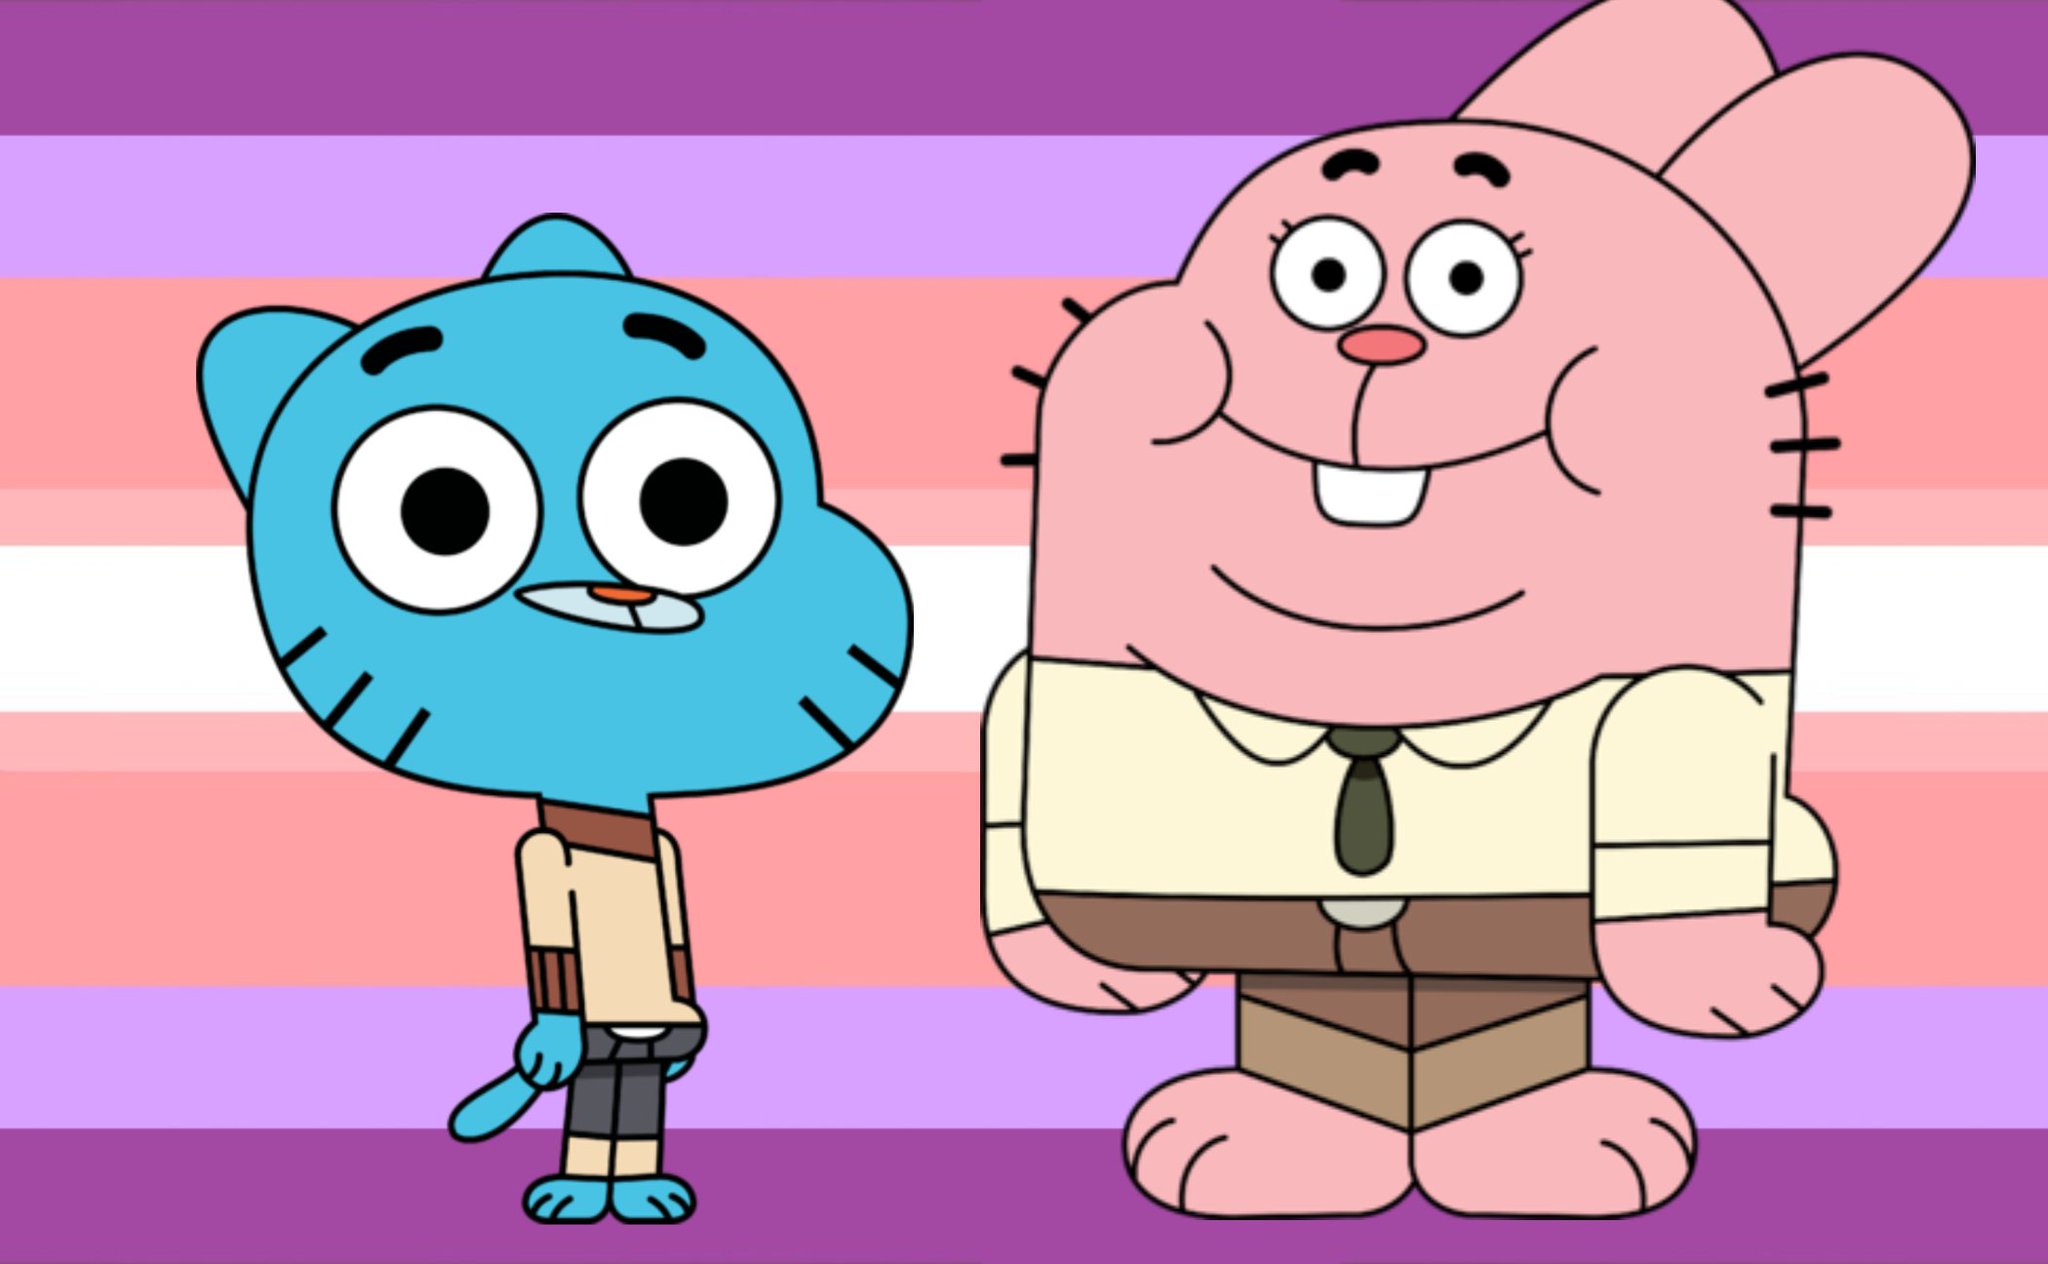 Your Fav is Proship and Richard Watterson from The Amazing World of Gumball are proship and dating!